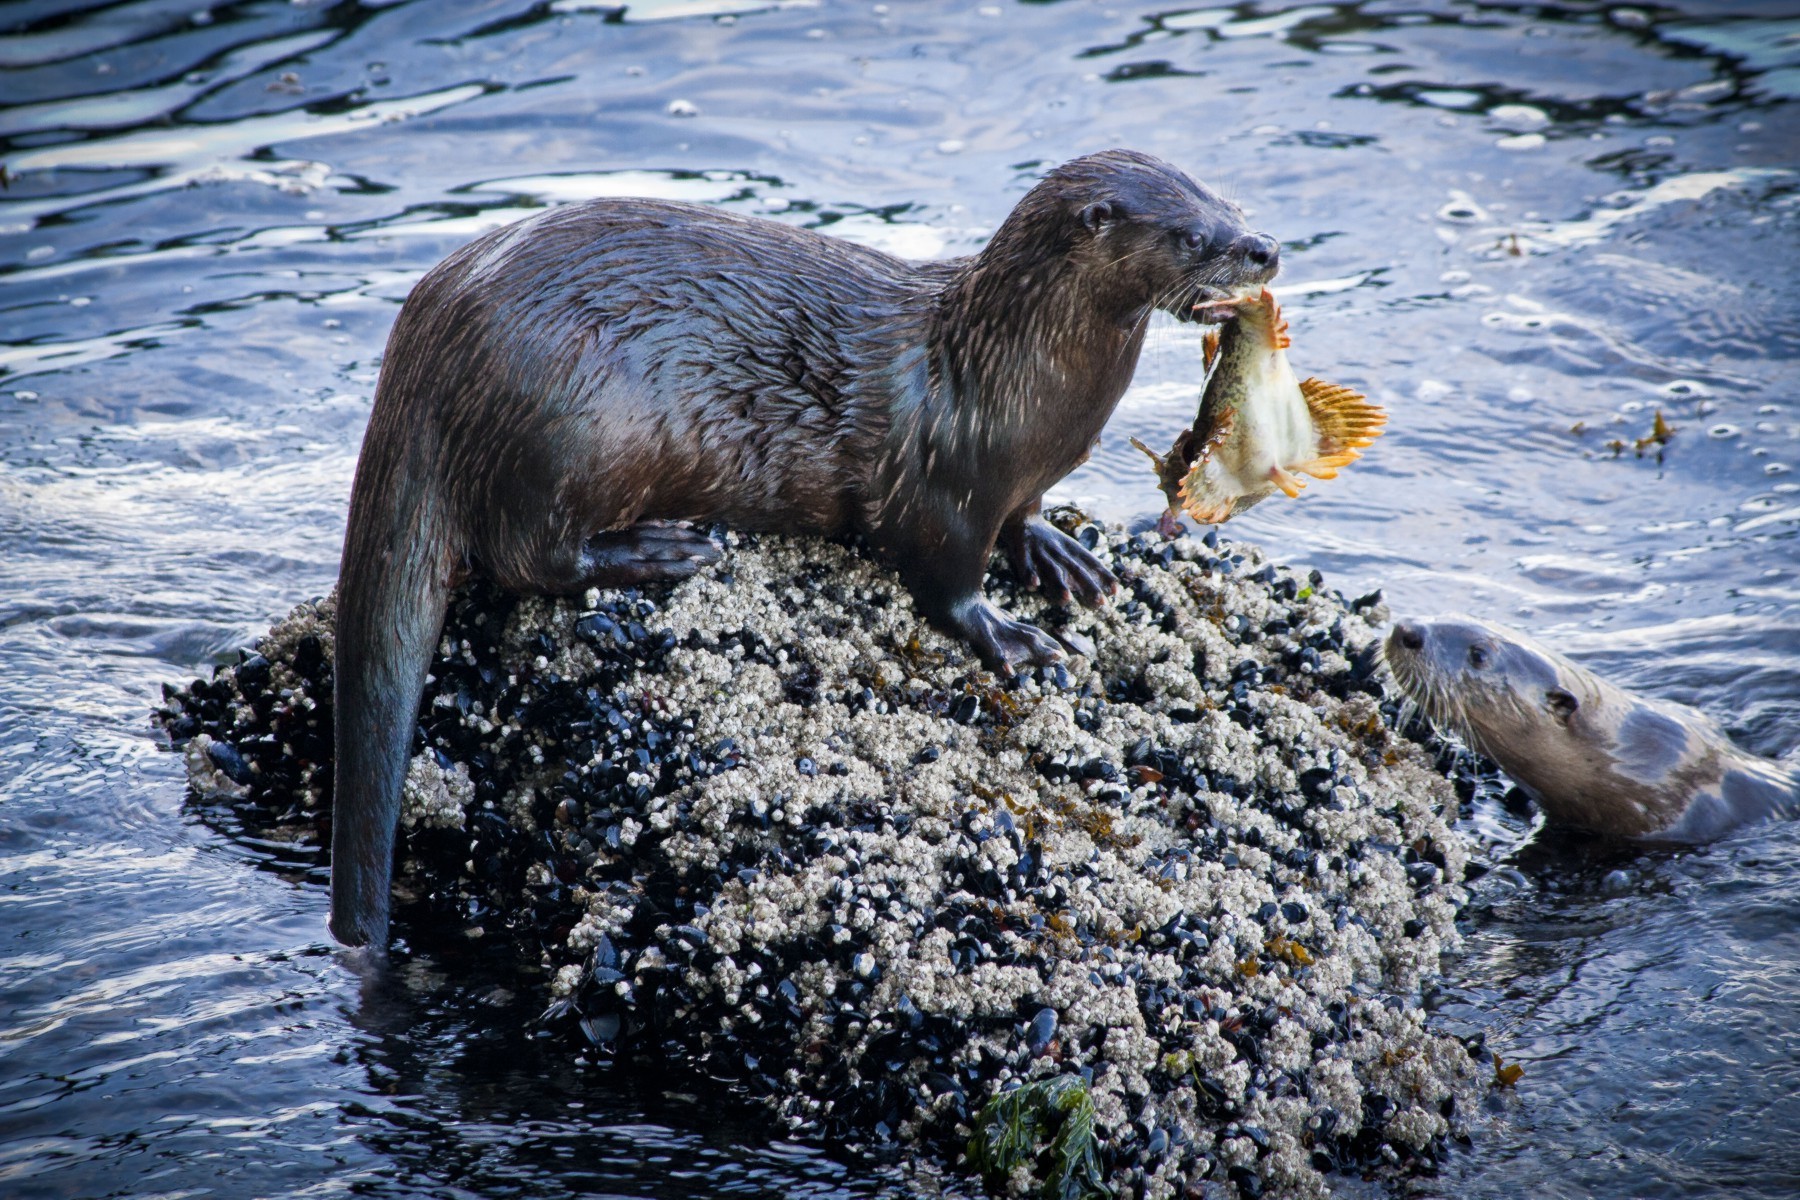 Otter sitting on a large rock in rippling water, eating a big fish..  Copyright Nesime Askin (OERS)